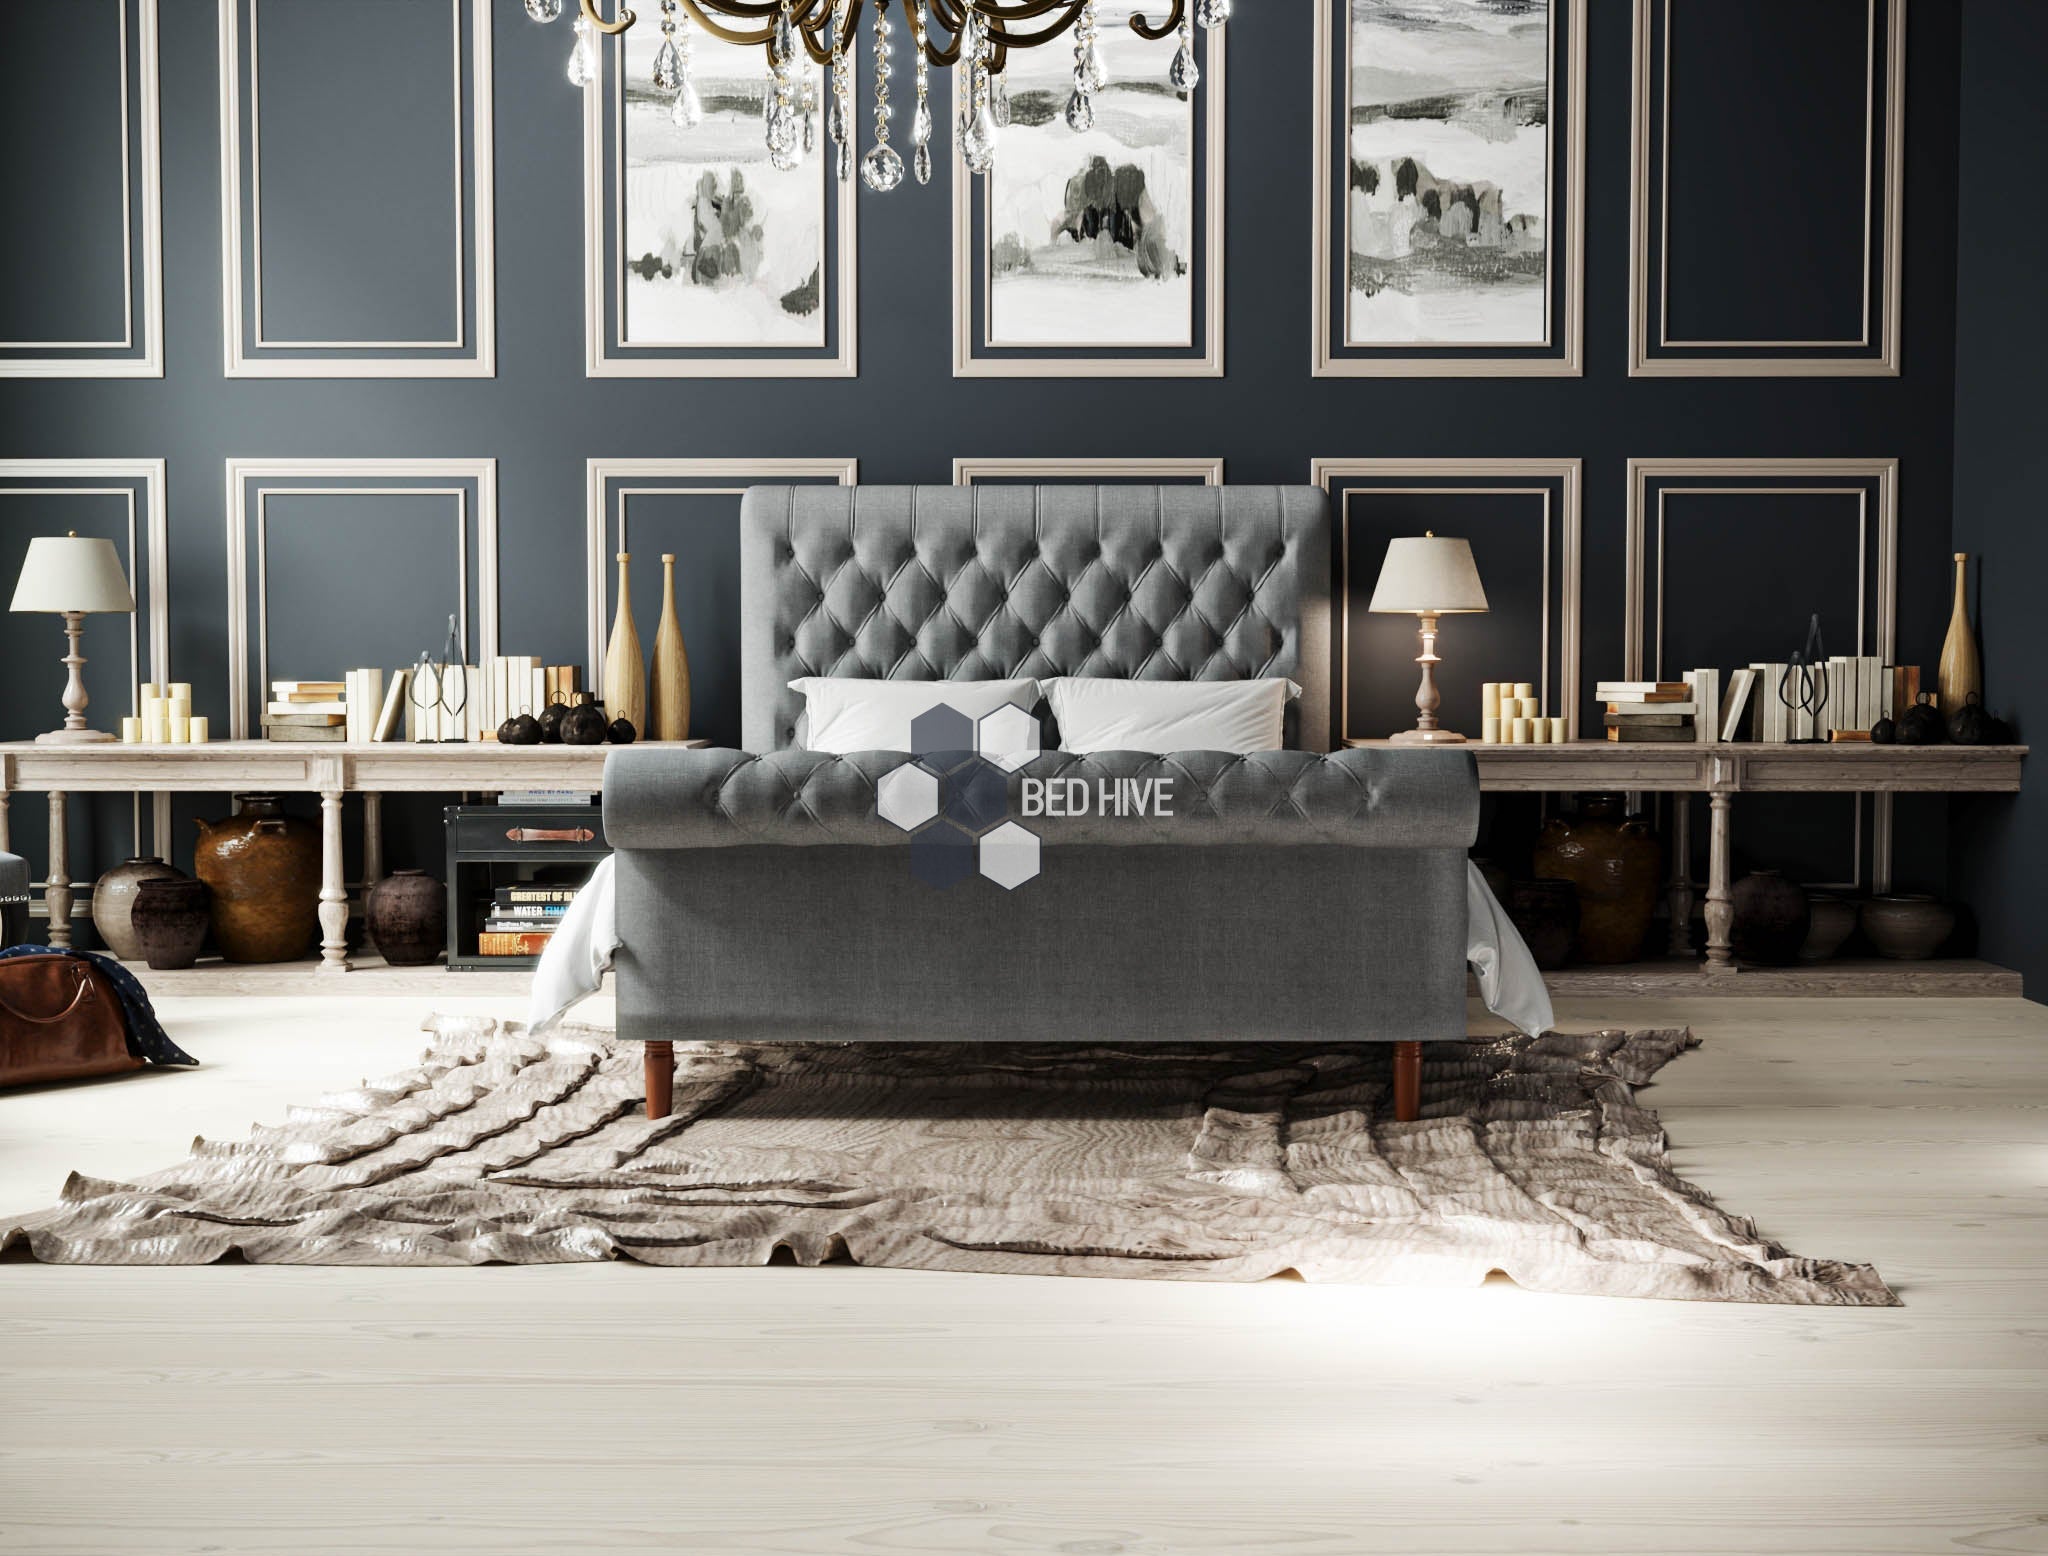 Esty Chesterfield Sleigh Bed, Sleigh Bed, Chesterfield bed, sleigh scroll bed, ottoman gas lift bed, underbed storage, chesterfield bed, Grey fabric bed, grey bed